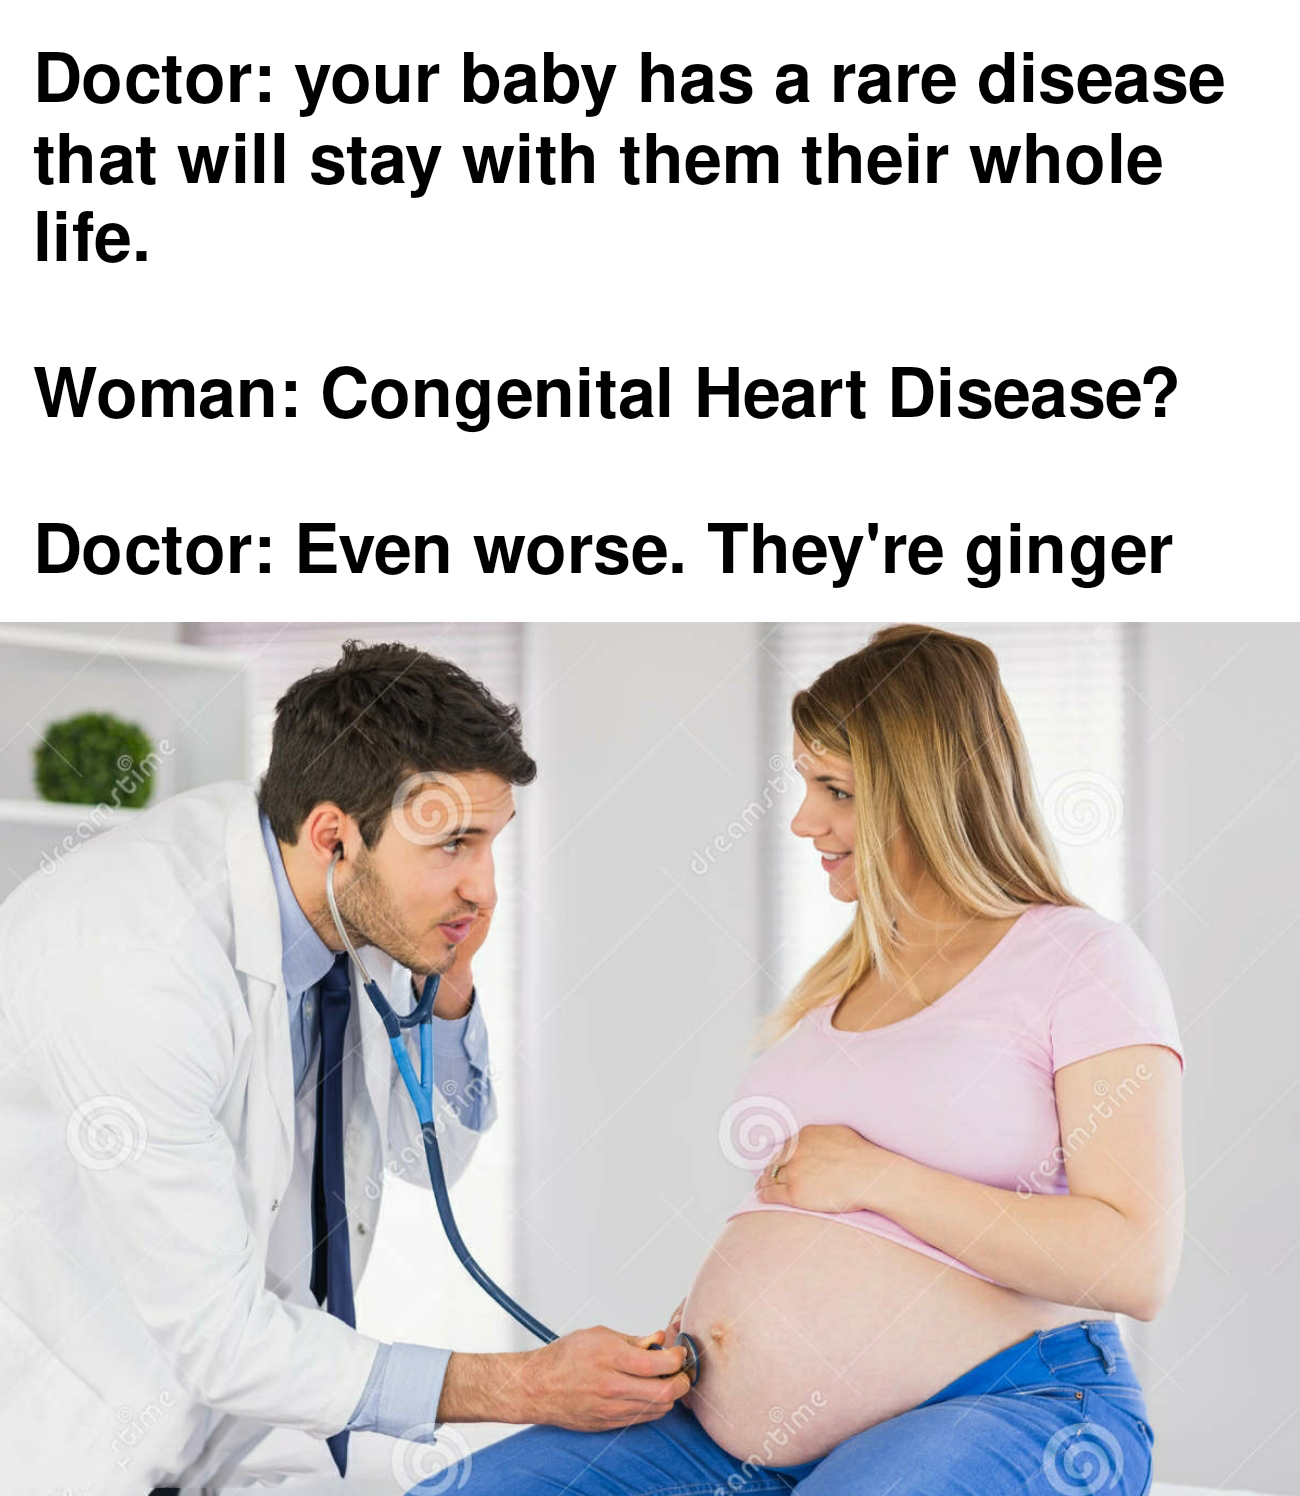 funny memes - dank memes - shoulder - Doctor your baby has a rare disease that will stay with them their whole life. Woman Congenital Heart Disease? Doctor Even worse. They're ginger vo are